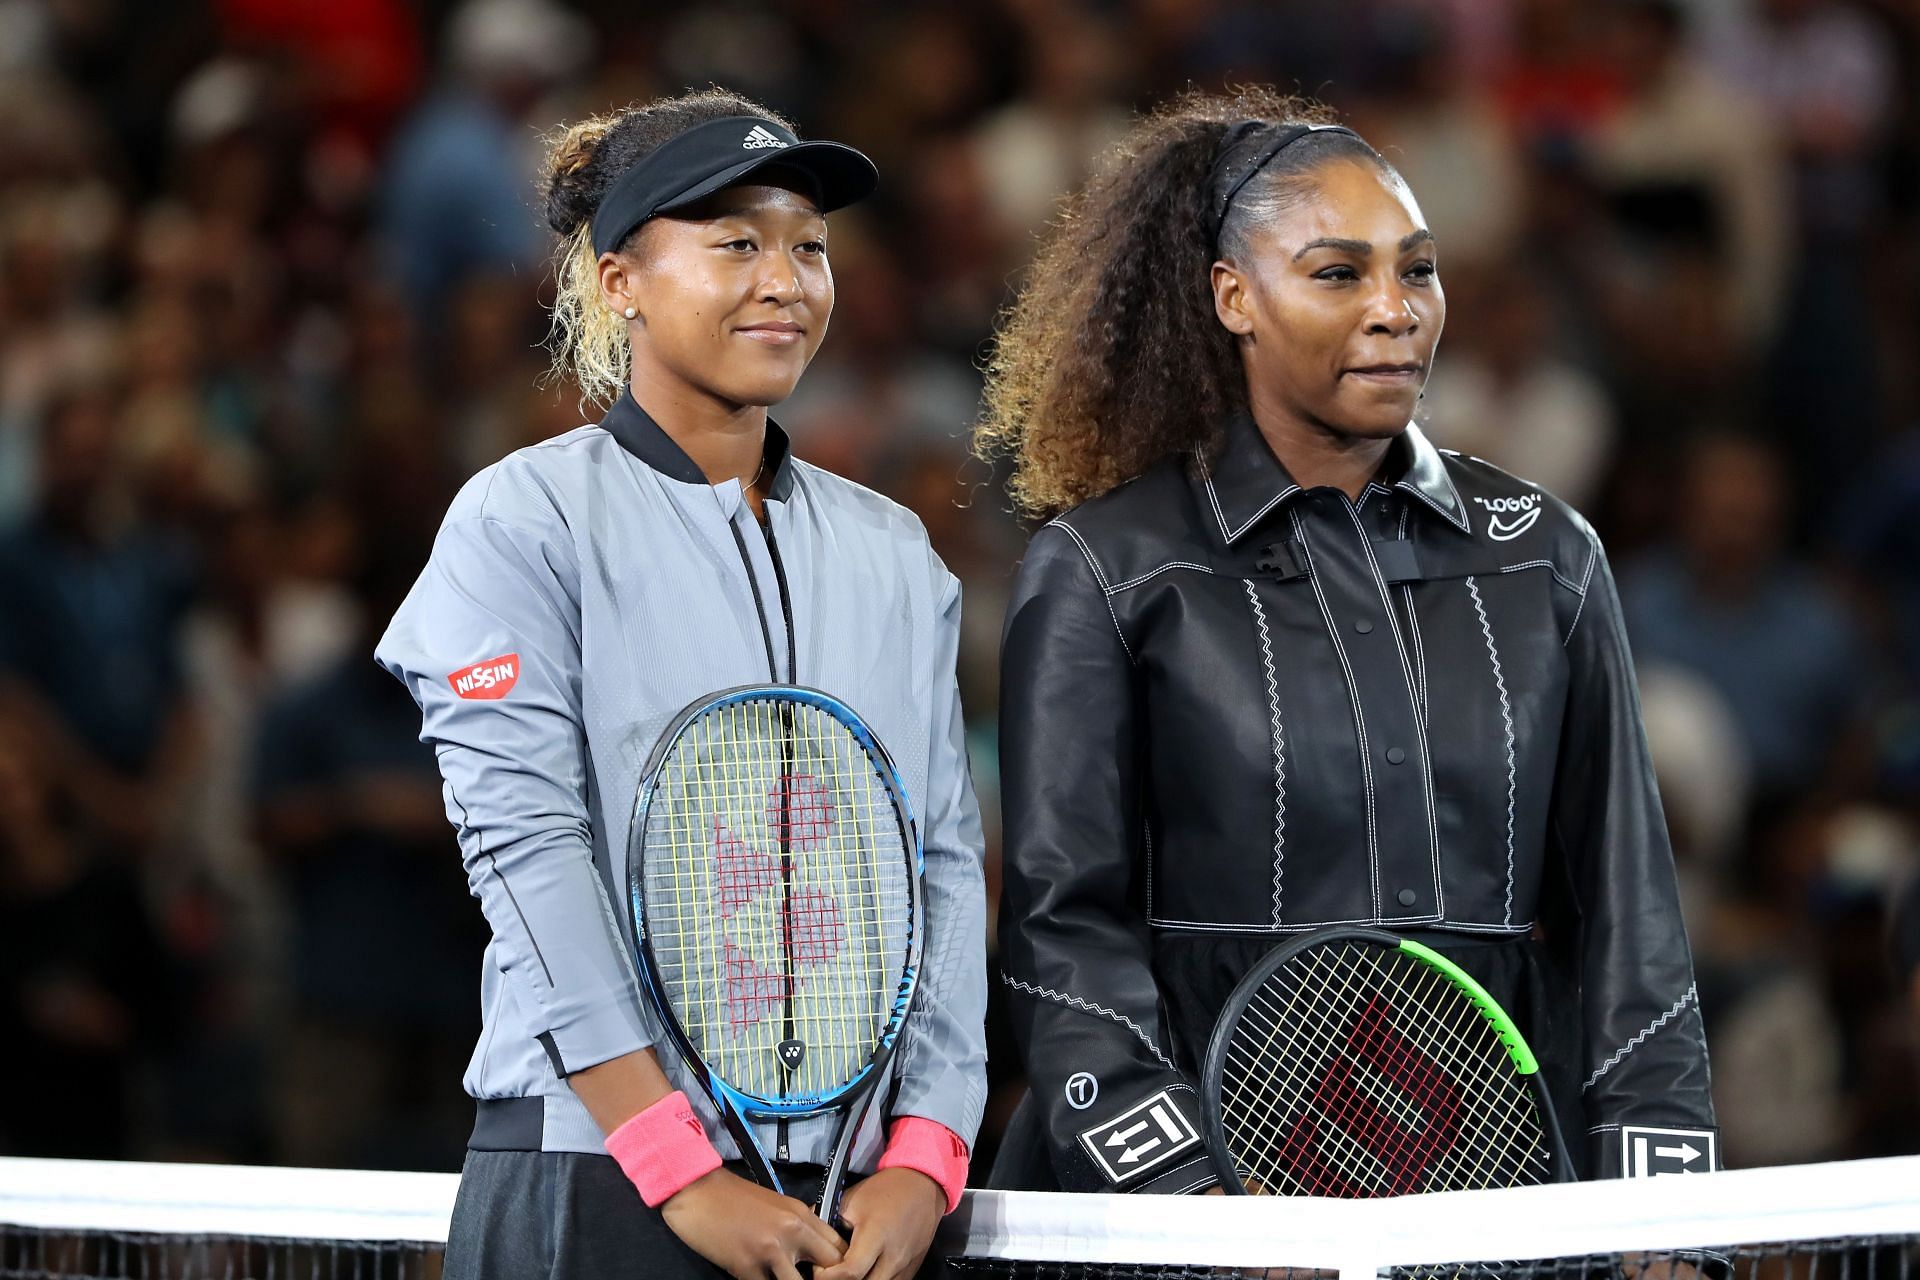 Naomi Osaka pictured with Serena Williams at the 2018 US Open.